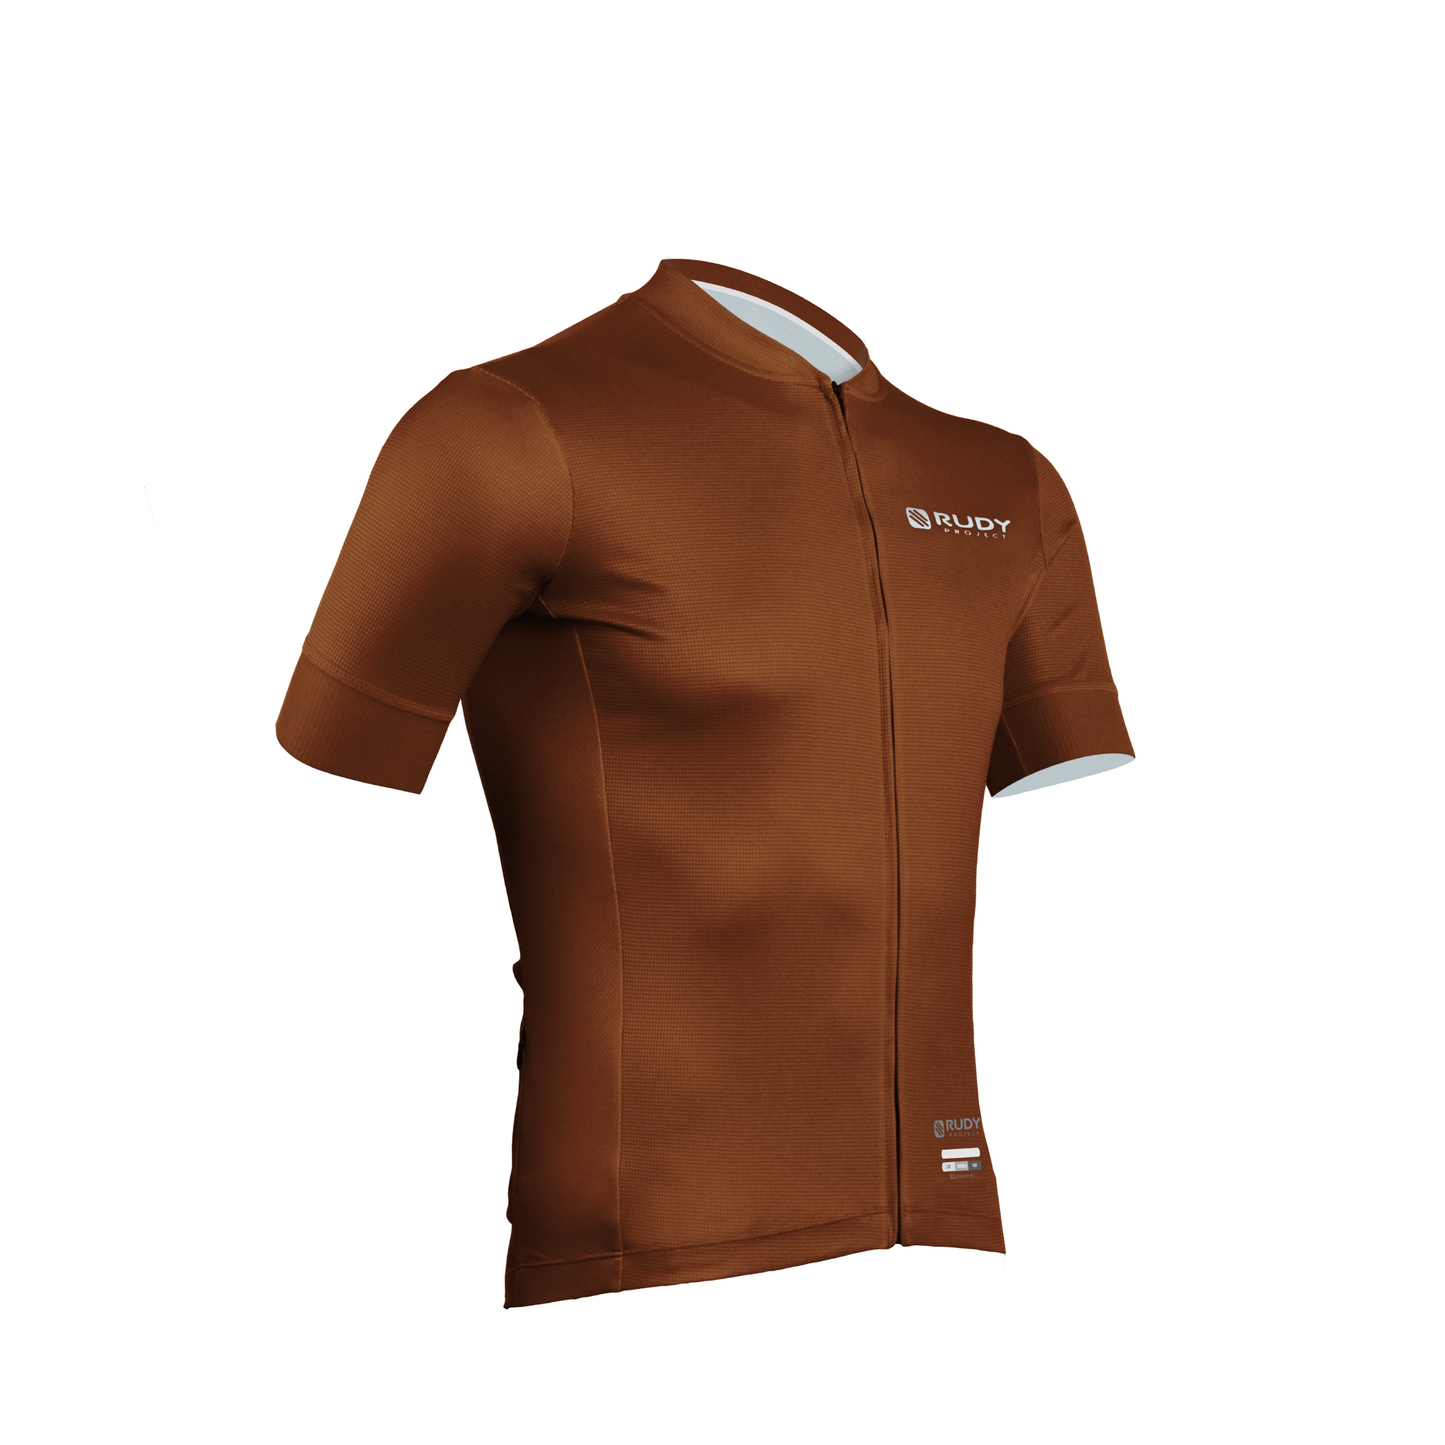 Cycling Jersey in Amber - Unisex